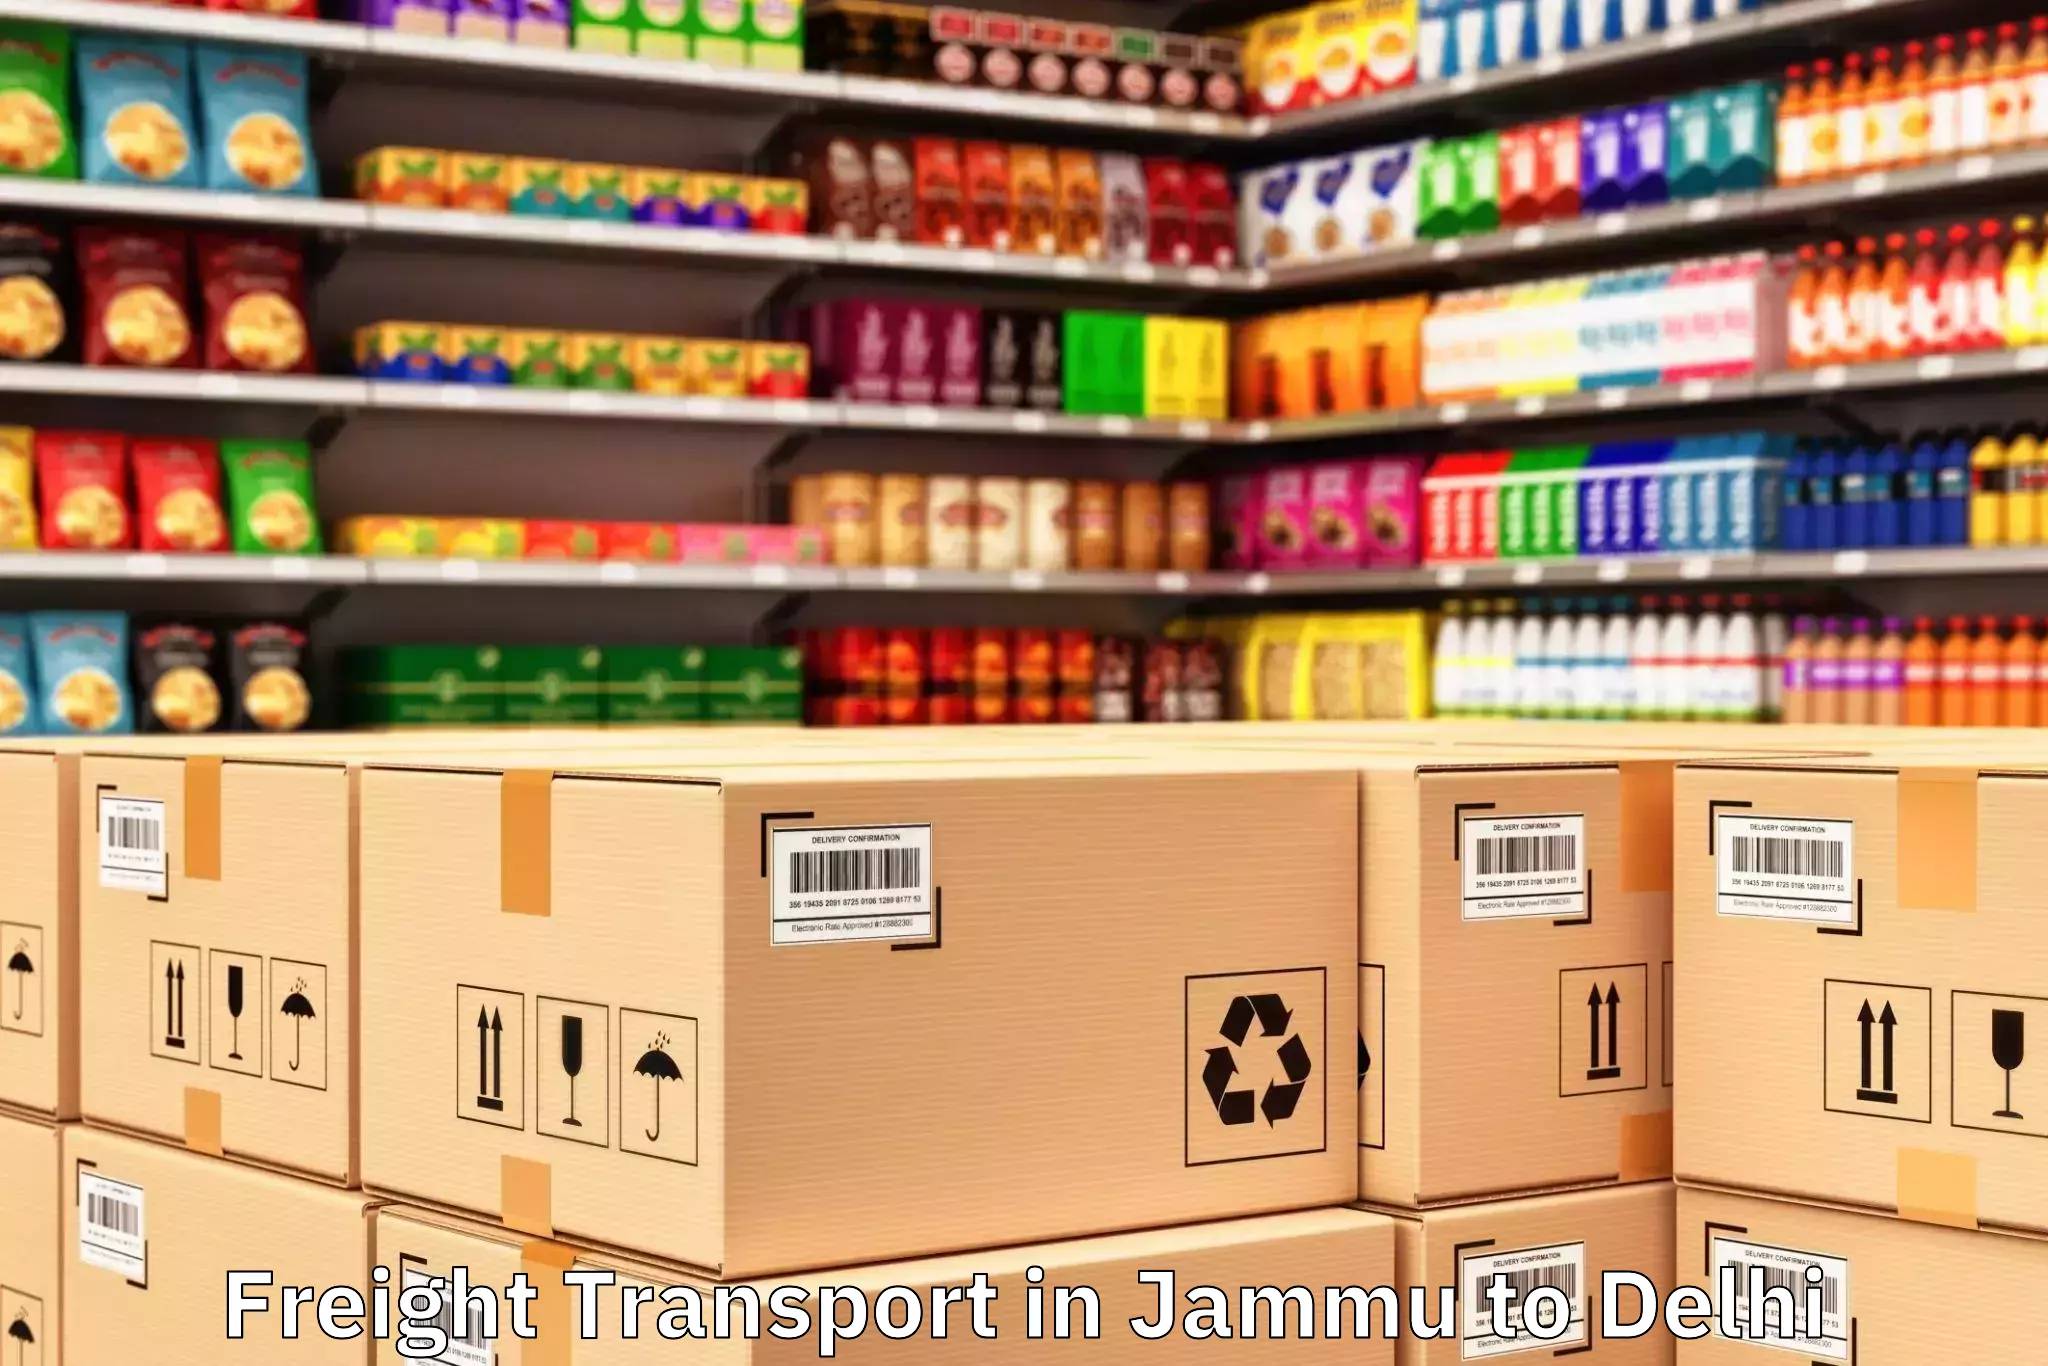 Top Jammu to Unity One Janakpuri Mall Freight Transport Available